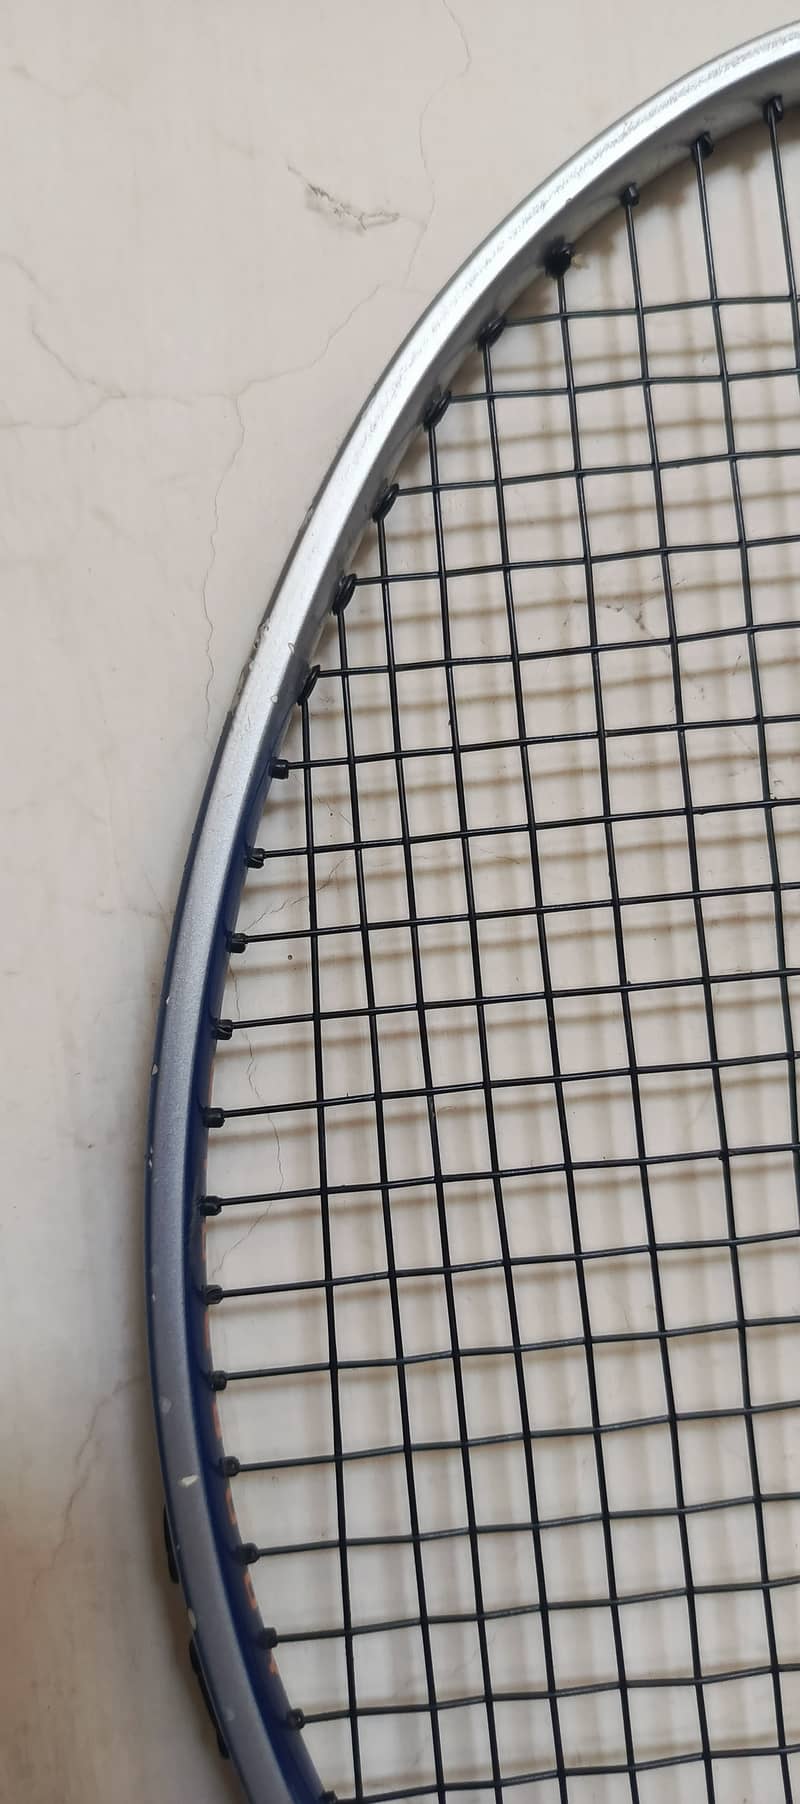 Badminton Racket | Hiqua 150 made in USA weight 84 tension 28 lbs 9